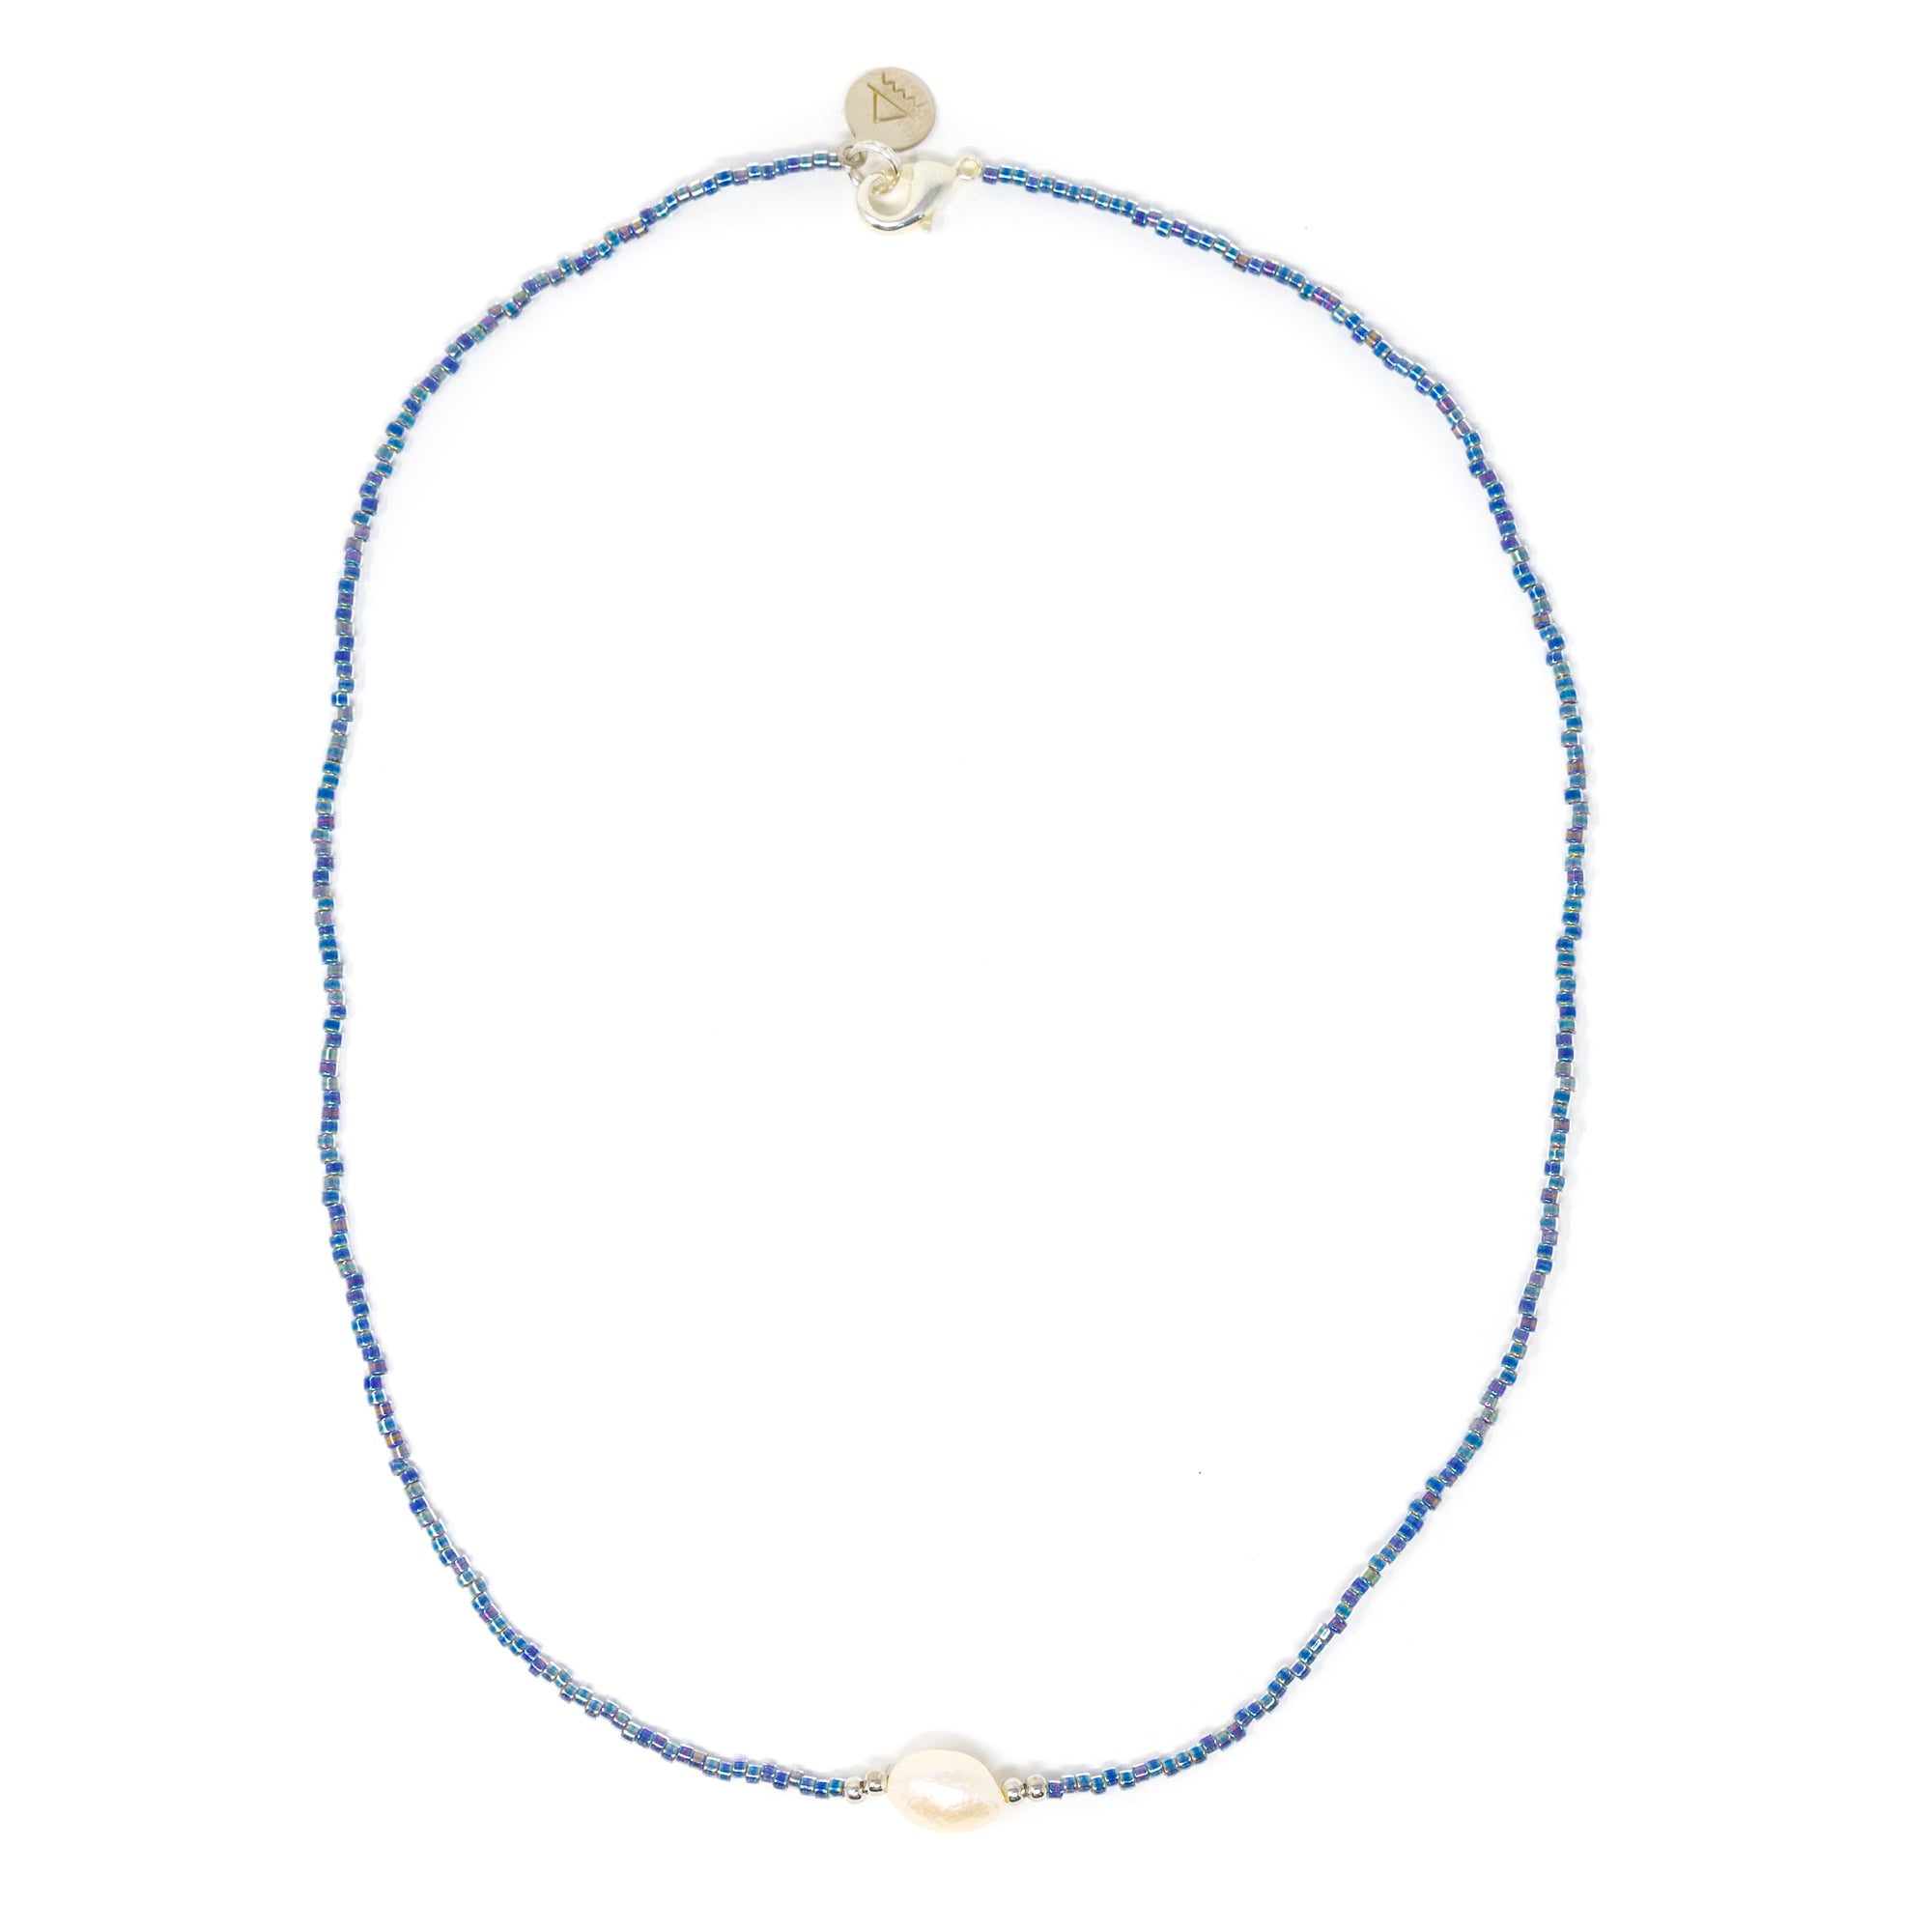 Baroque White Pearl Necklace in Marine Blue & Silver